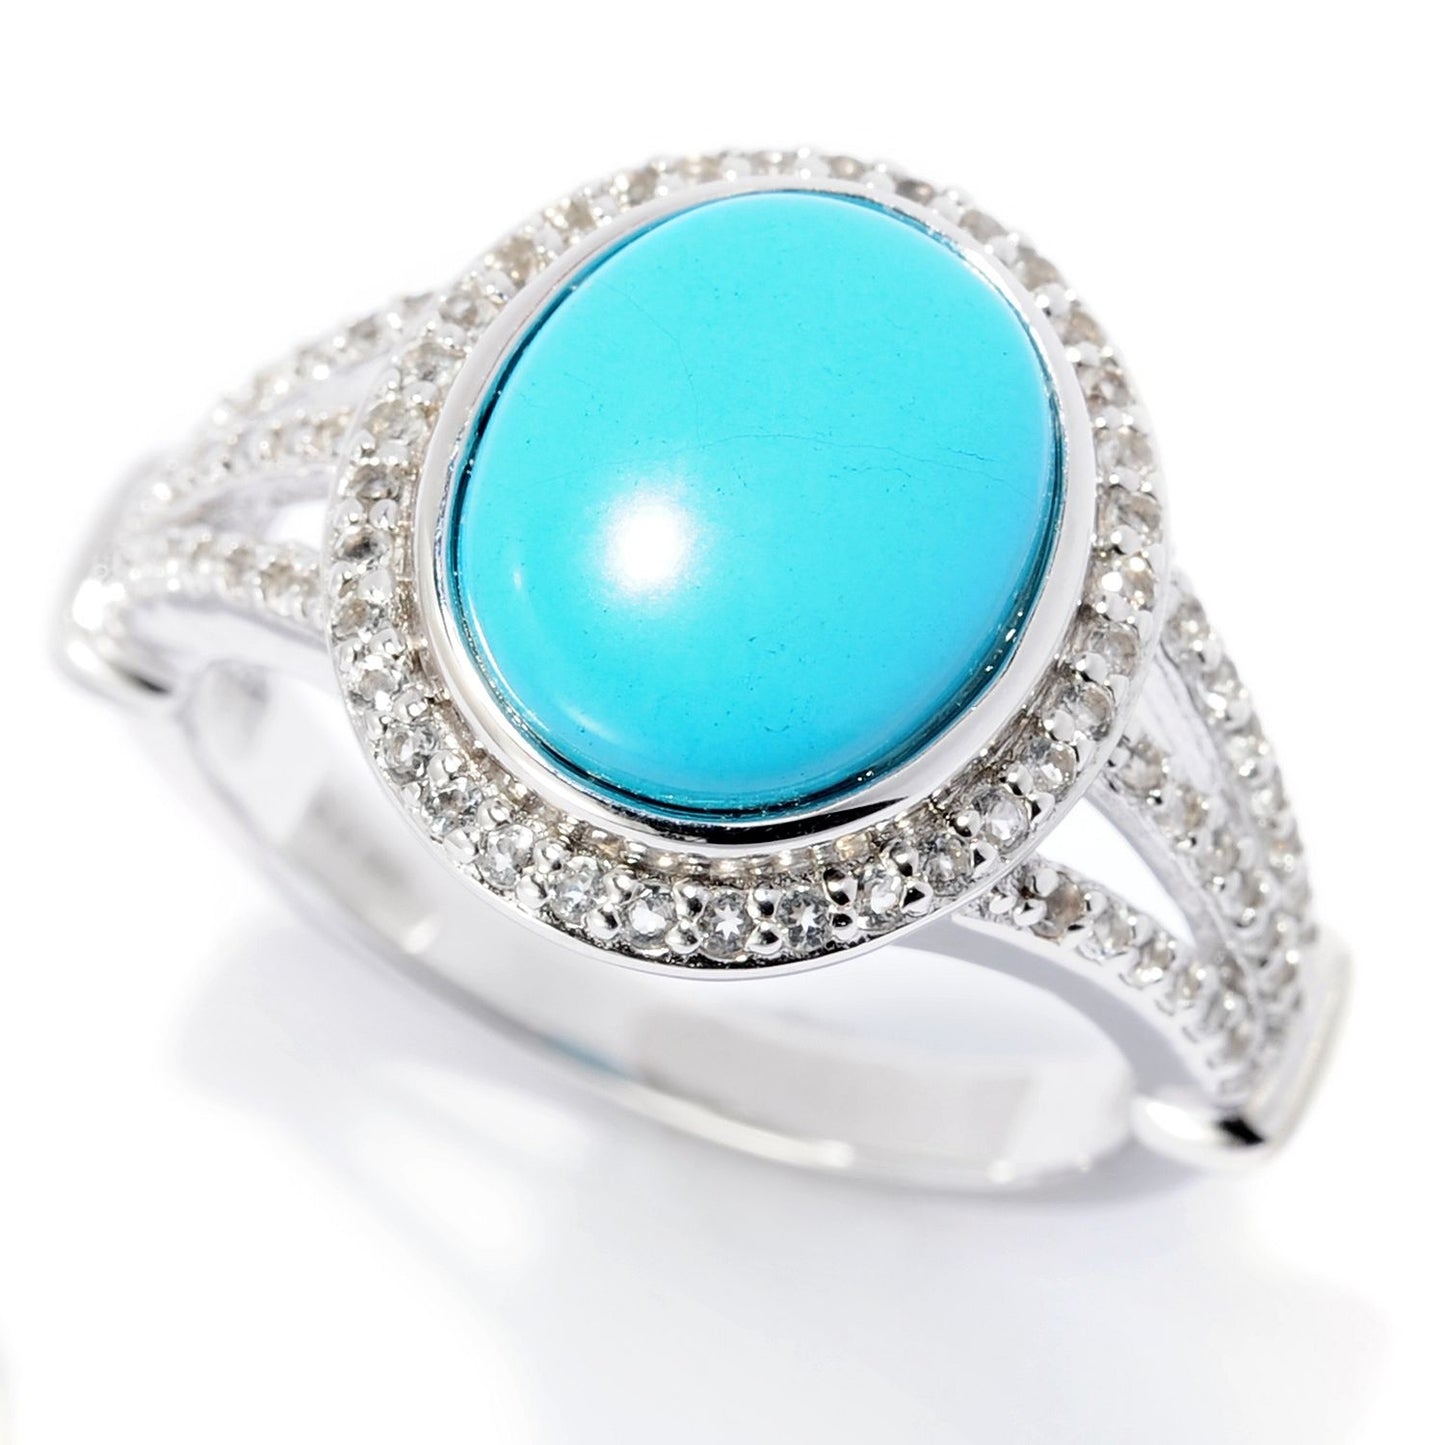 Pinctore Sterling Silver Sonora Beauty Turquoise & White Topaz Ring - pinctore